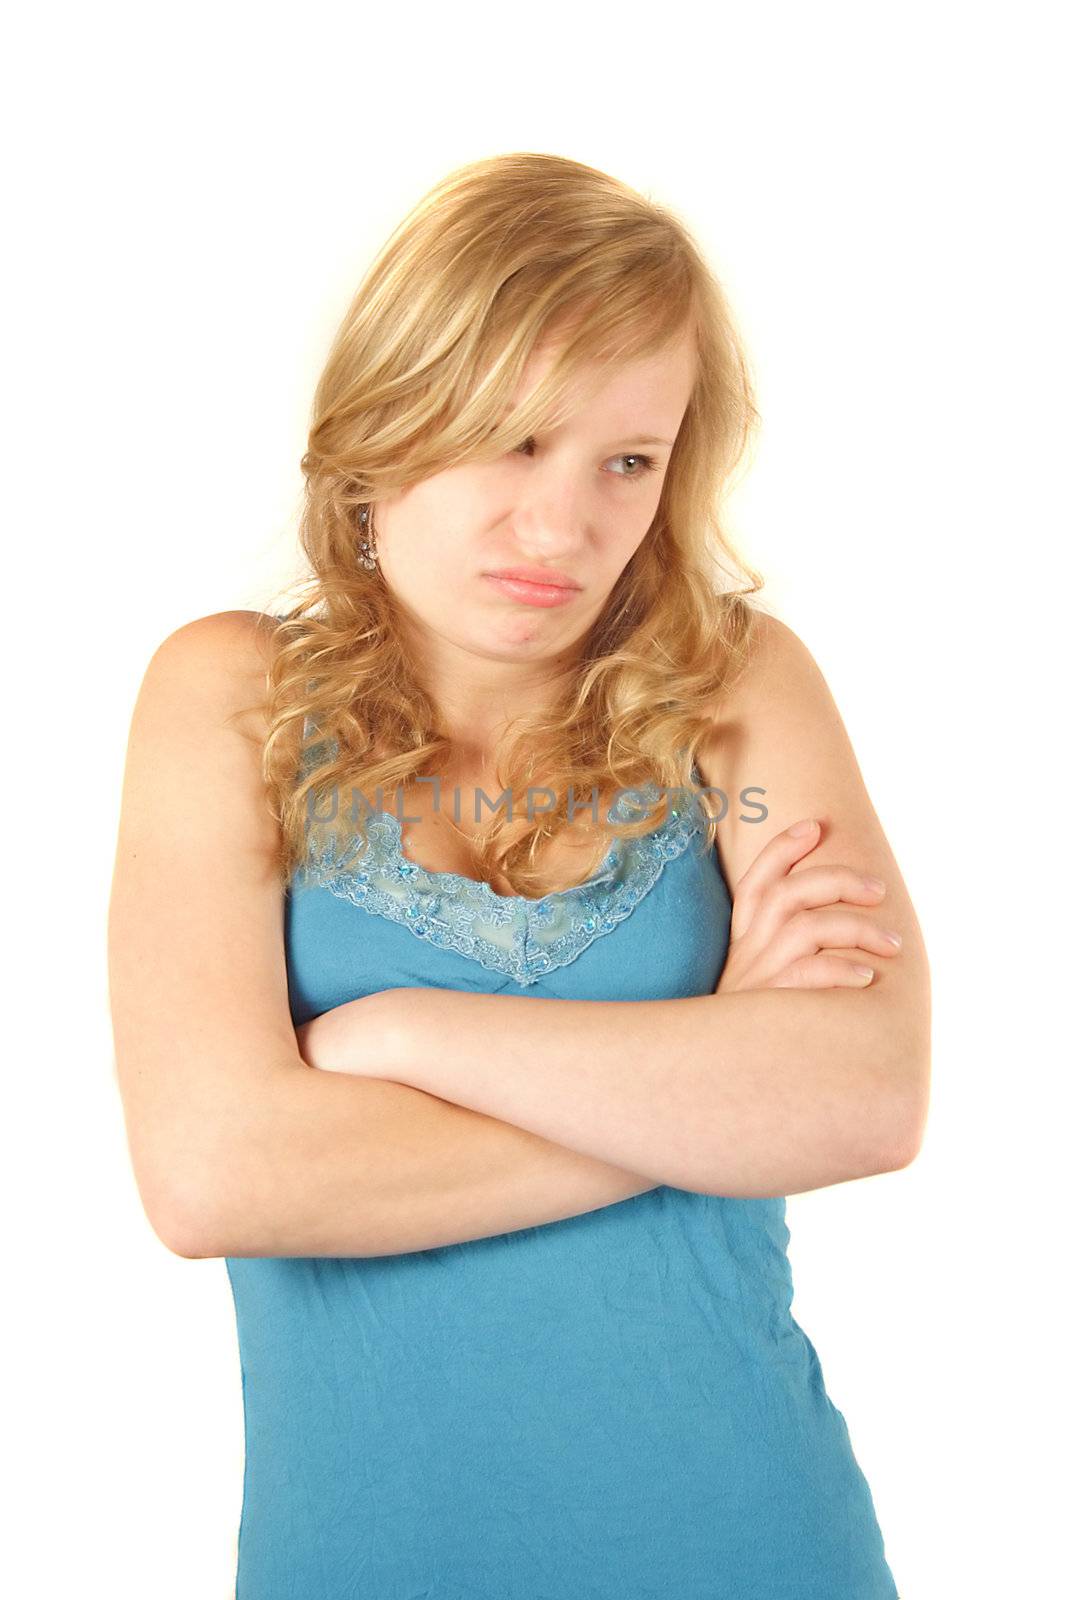 An awkwardyung woman. All isolated on white background.